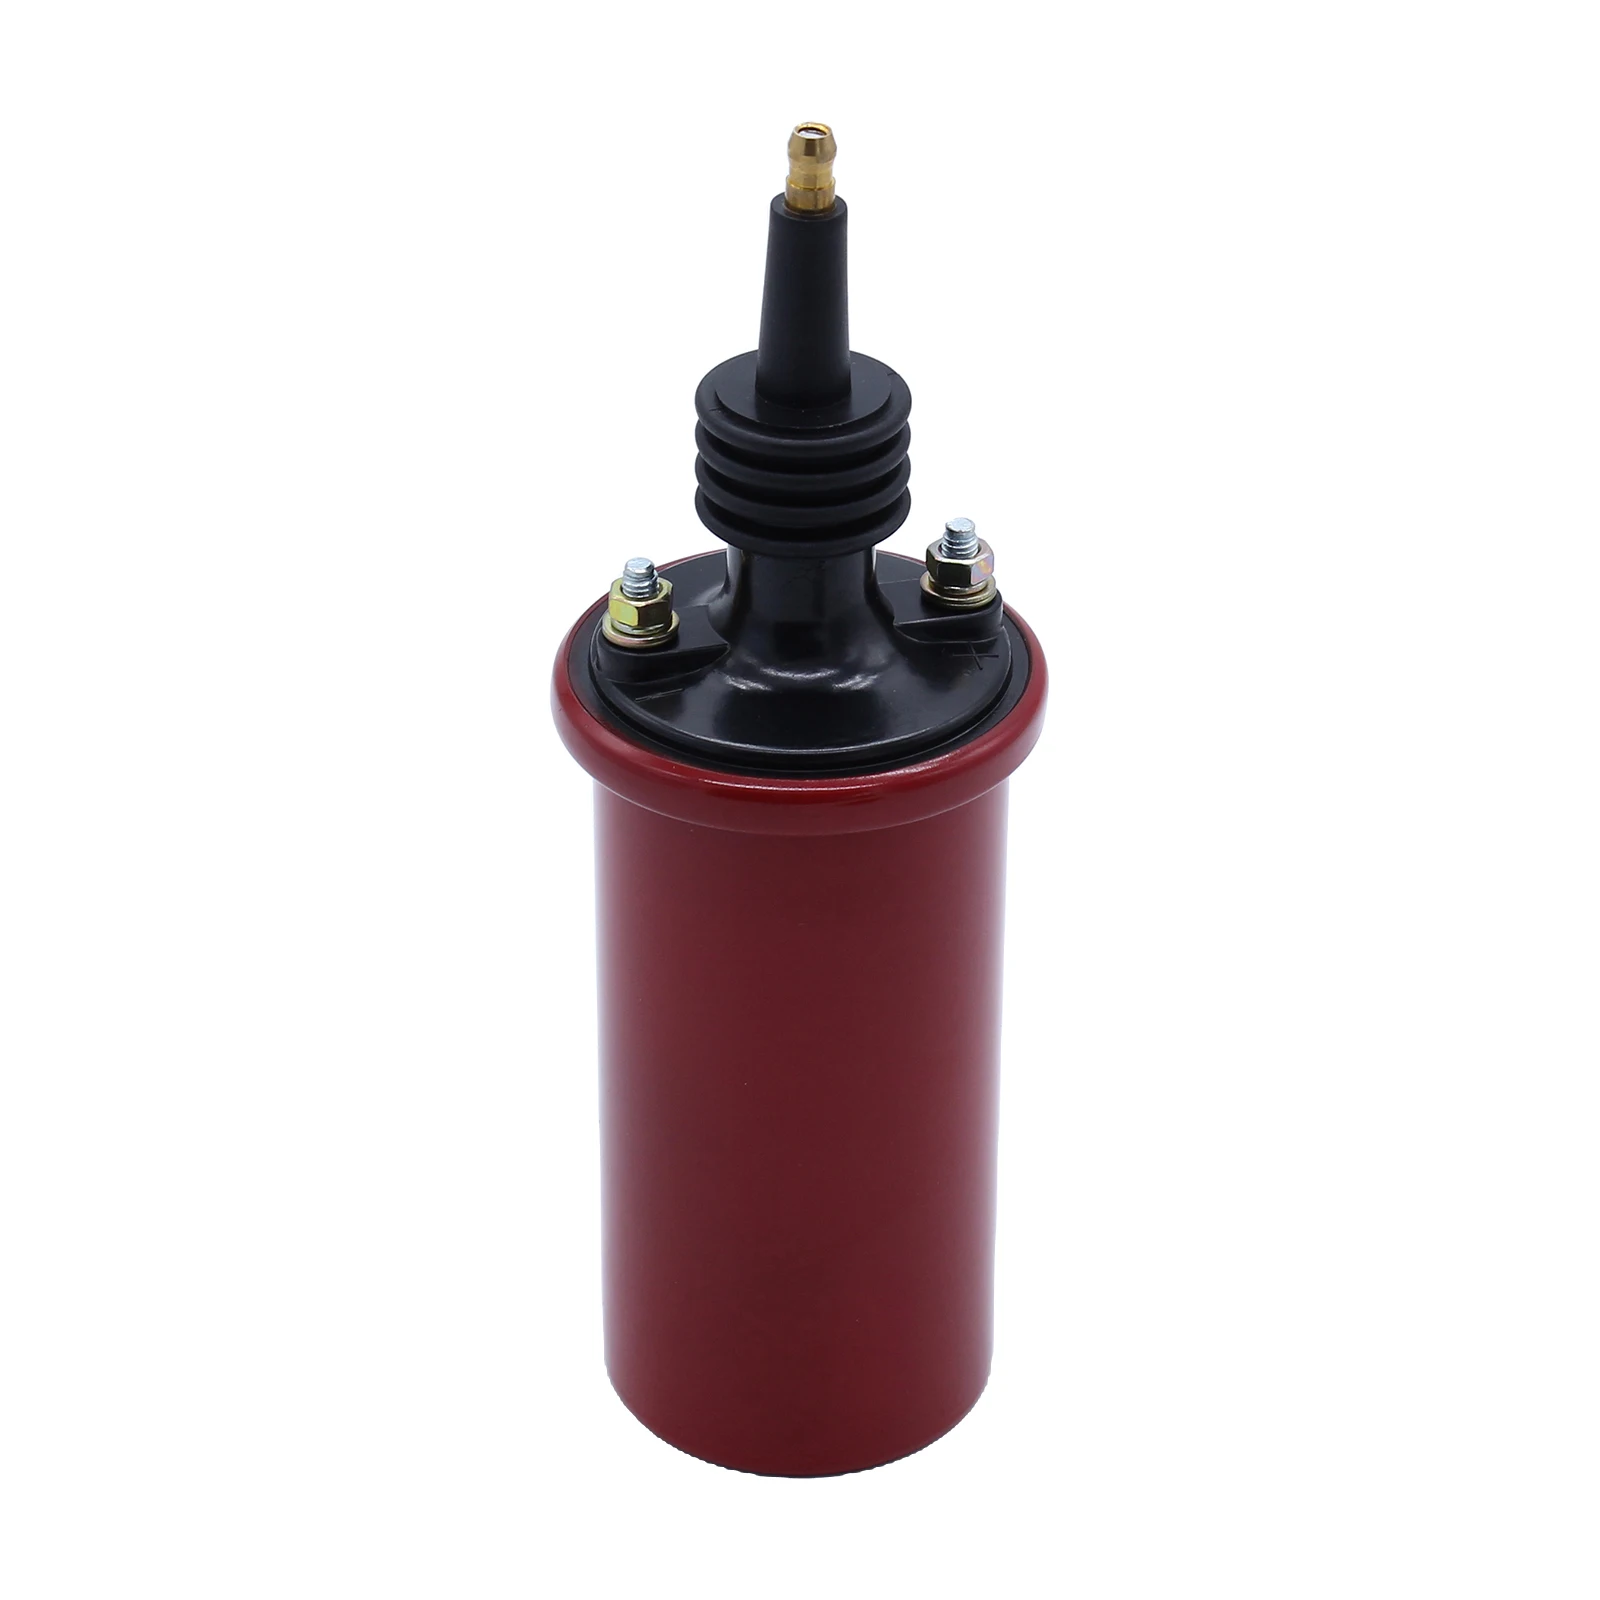  3 Coil Ignition Coil Canister Round without Label HEI-style Boot